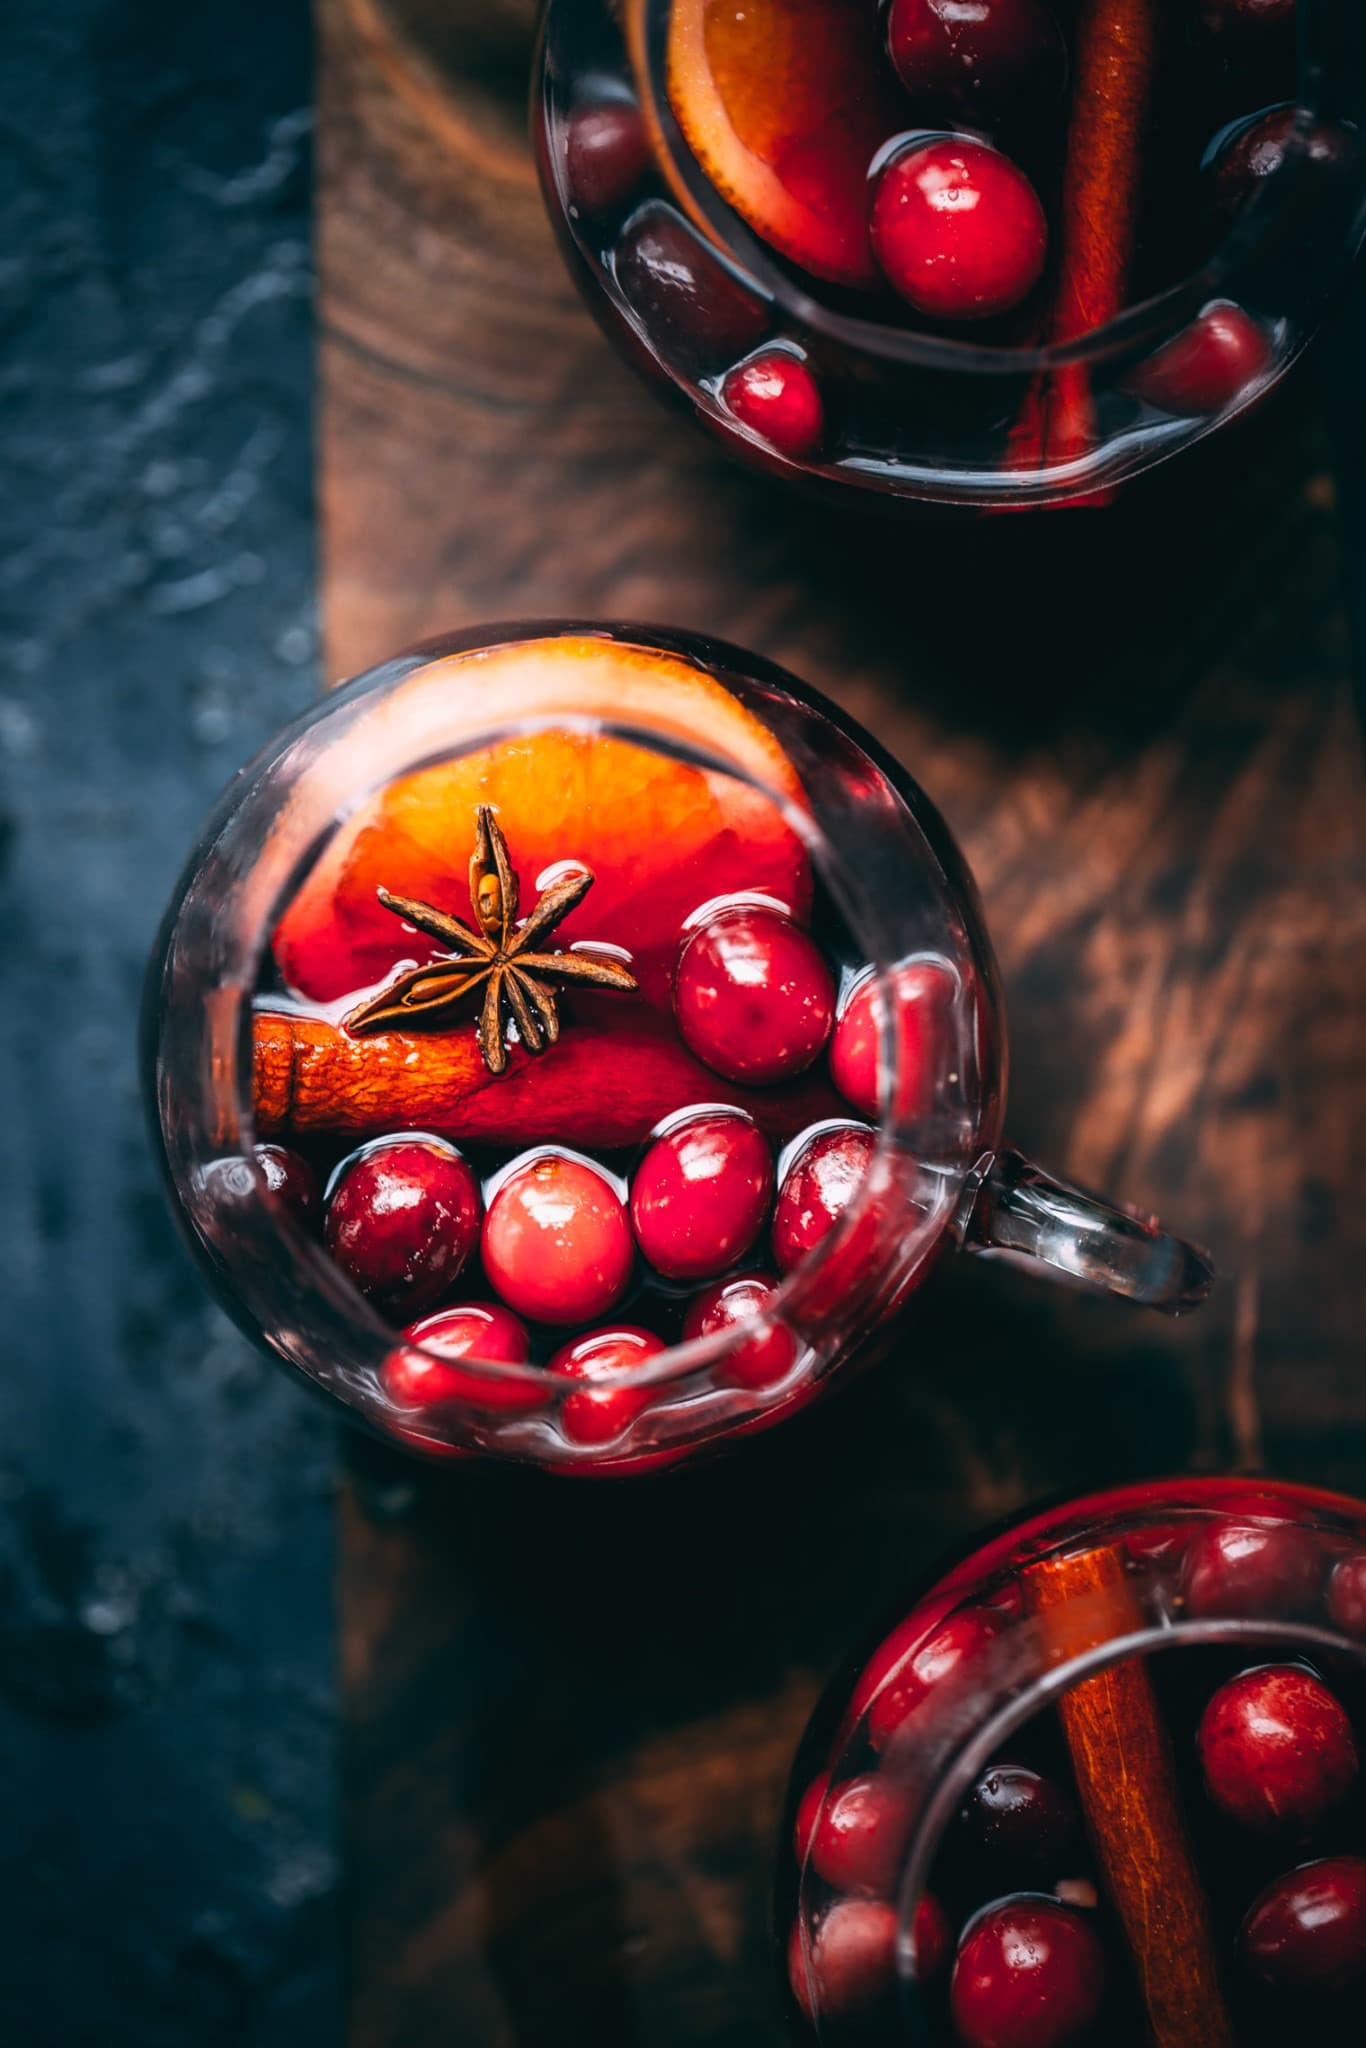 Top view of a glass of cranberry and orange mulled wine, garnished with cinnamon sticks and orange slices.